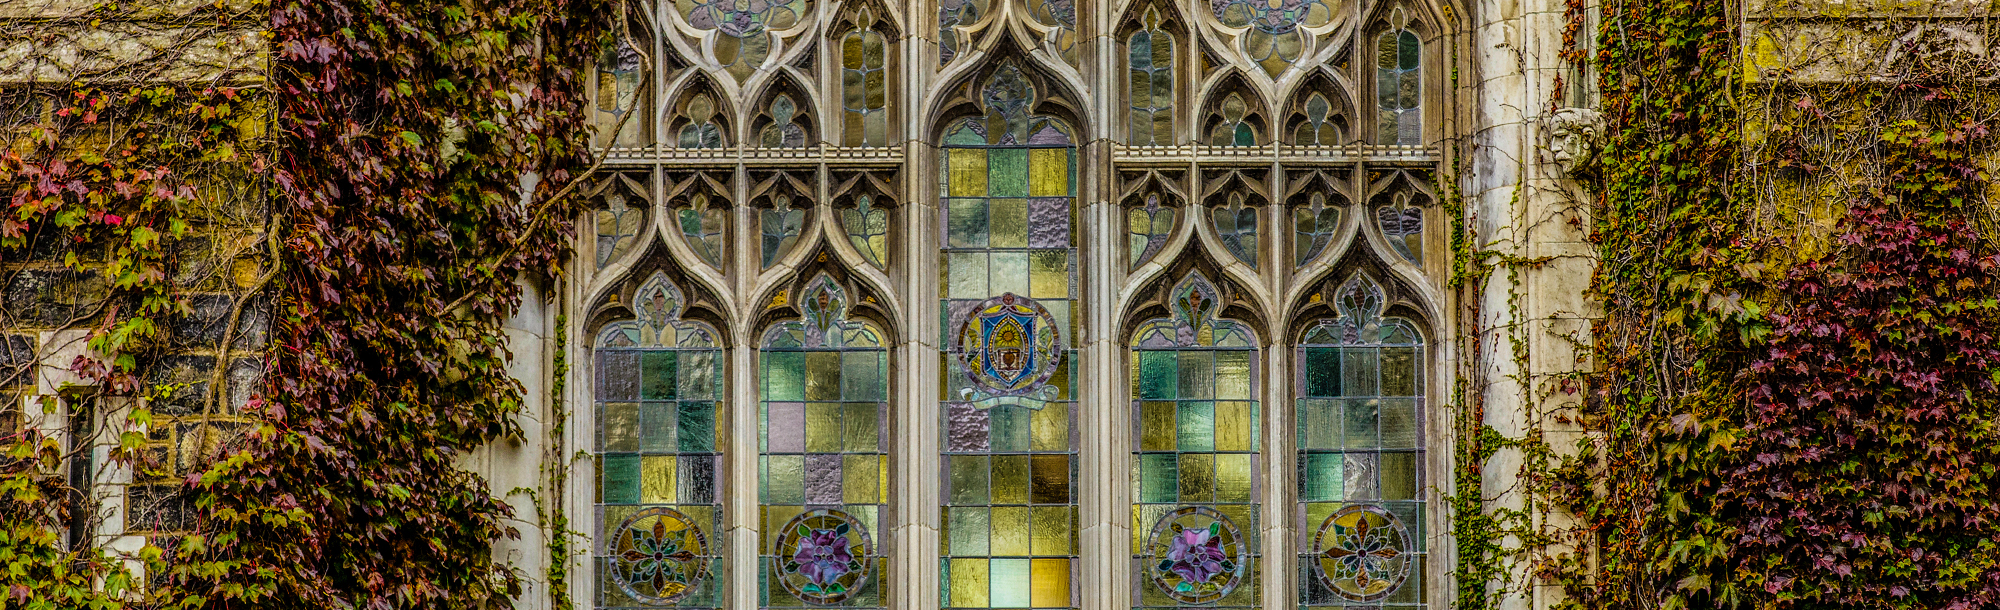 Close up of stained glass windows on an ivy covered building